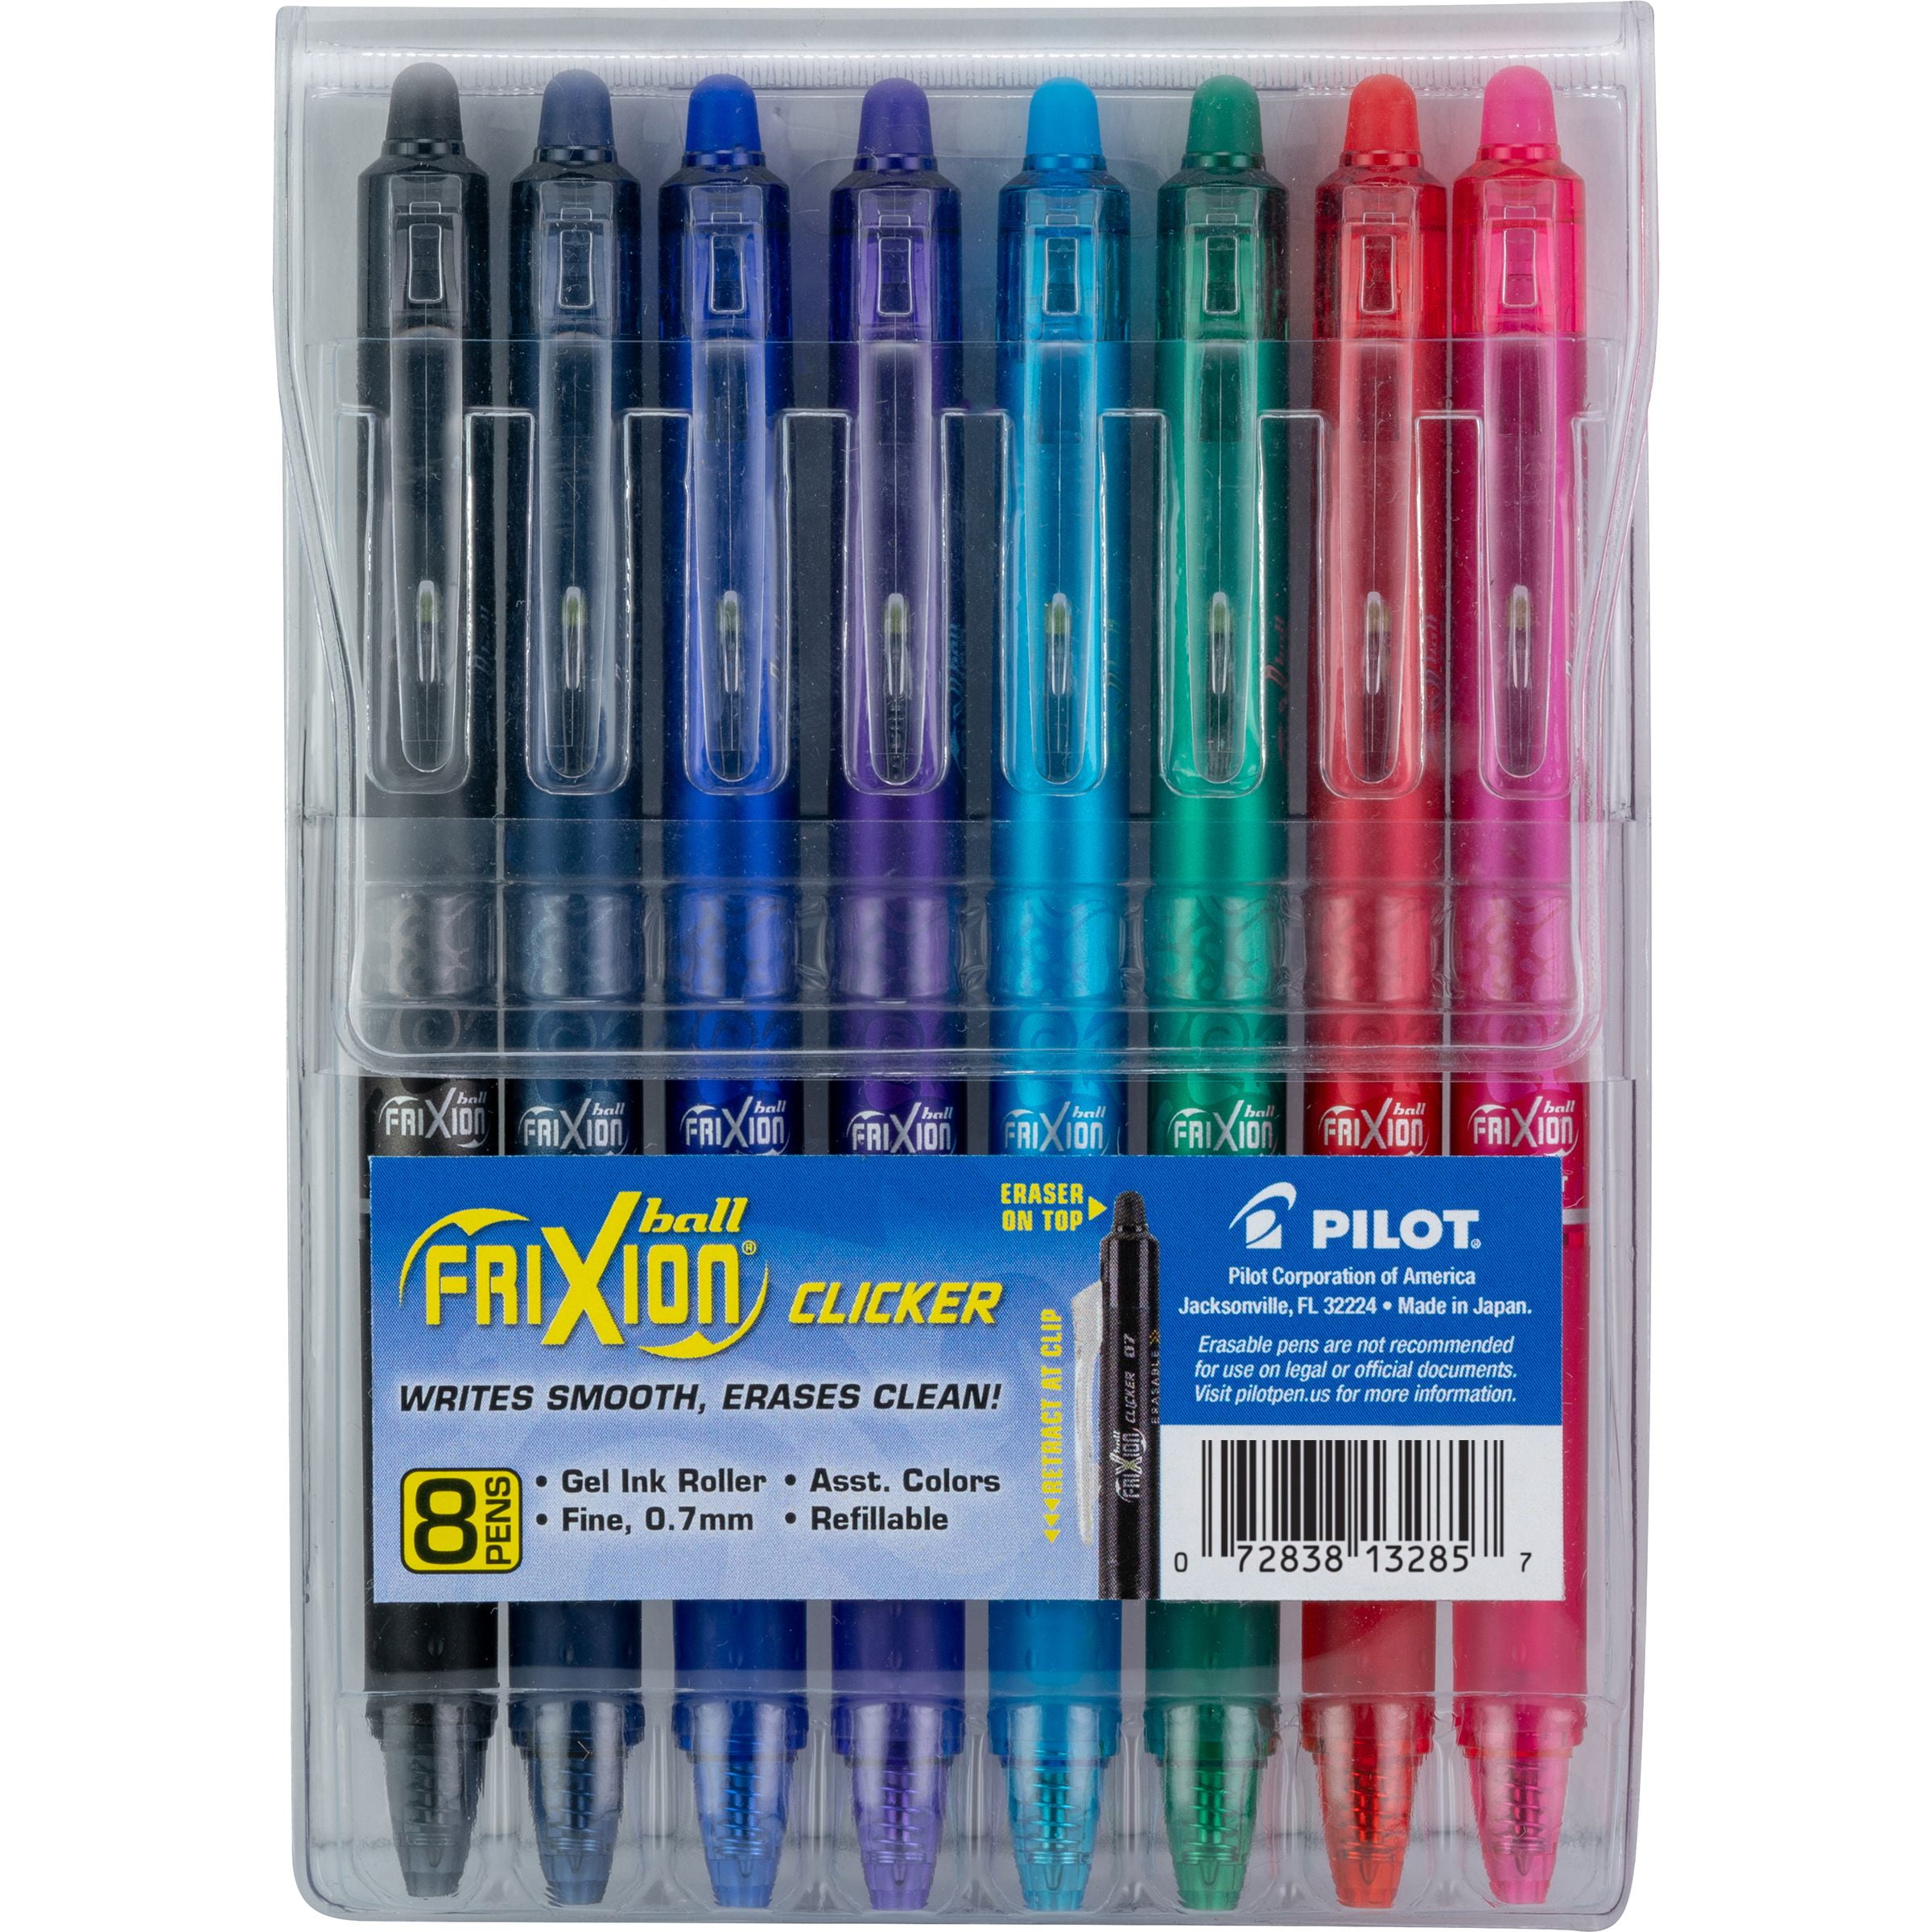 PILOT FriXion Clicker Erasable 31483 Refillable & Retractable Gel Ink Pens Fine Point 2-Pack - New Assorted Color Inks 